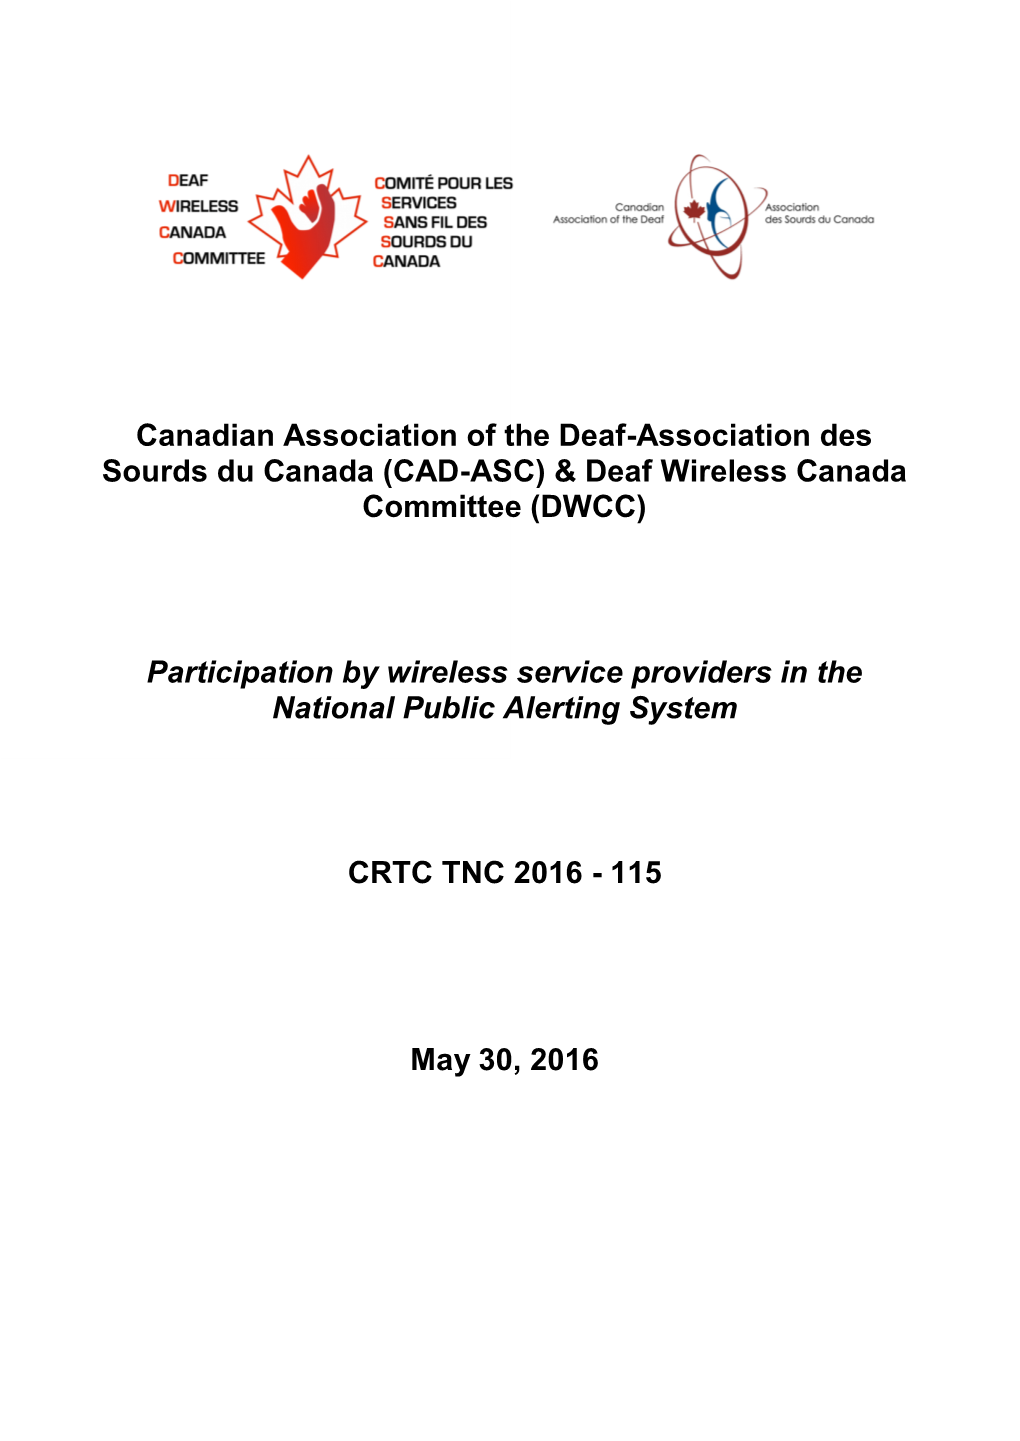 (CAD-ASC) & Deaf Wireless Canada Committee (DWCC) Particip